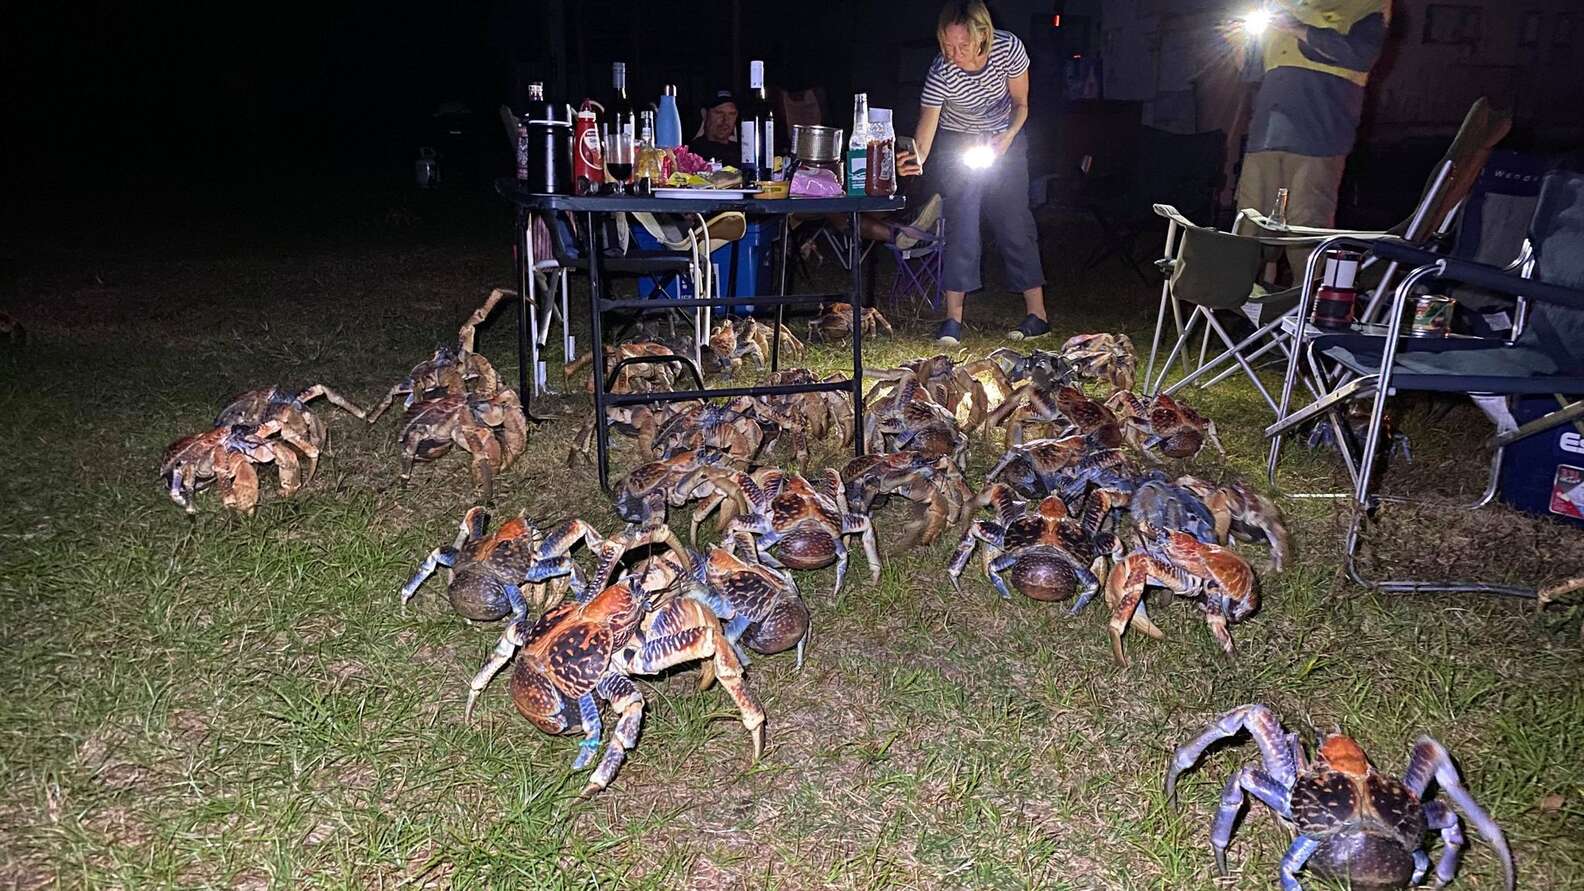 Crowd Of Giant Crabs Decides To Crash Family's Picnic - The Dodo